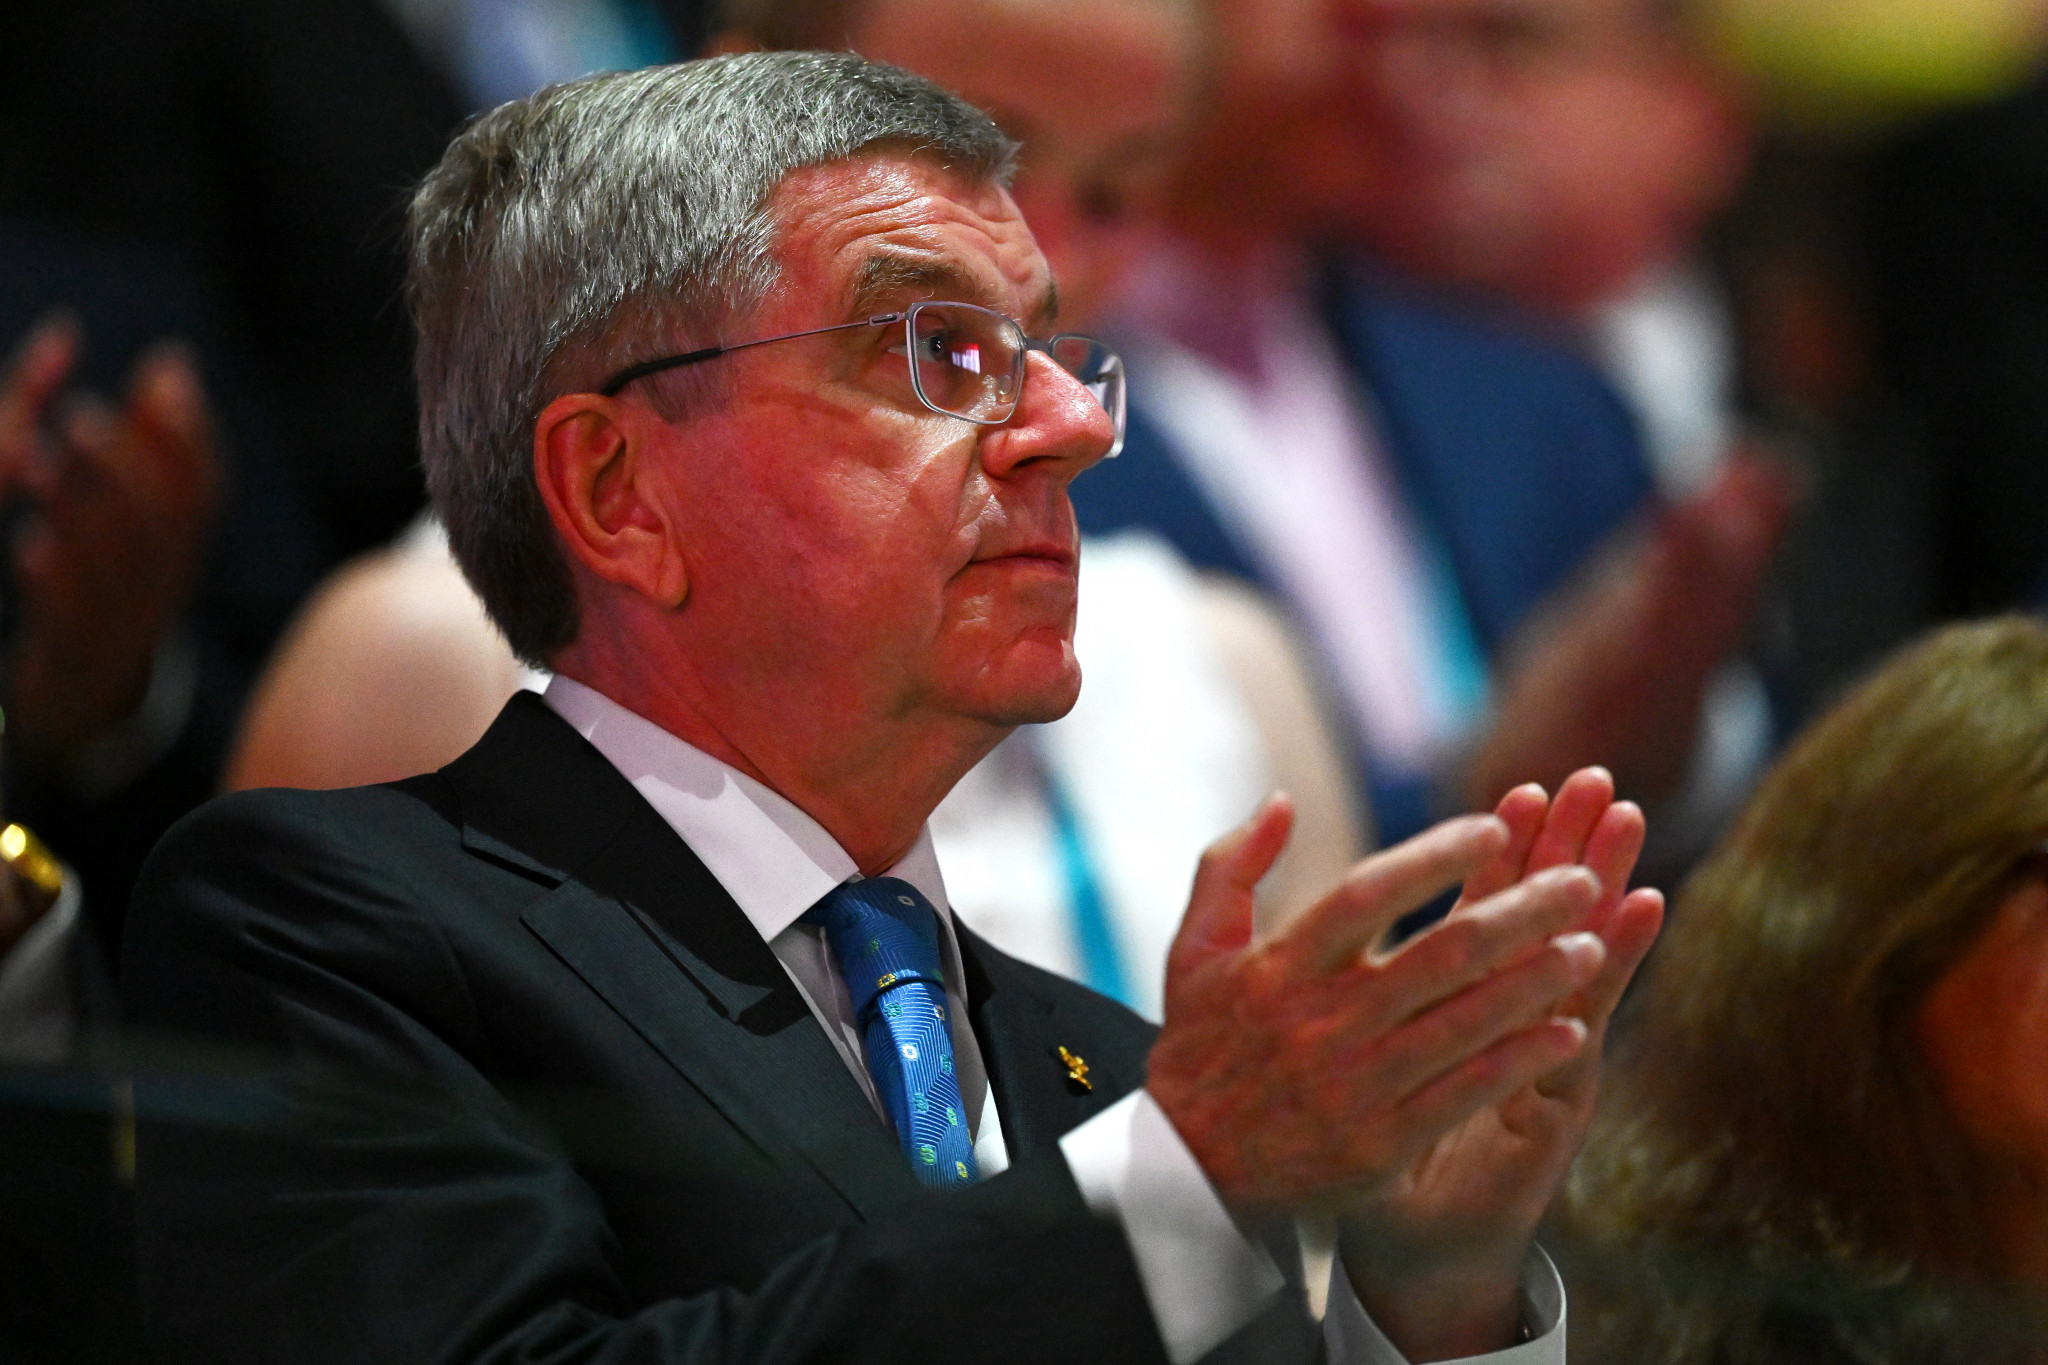 Thomas Bach was elected as IOC President in 2013 in place of Jacques Rogge and is set to lead the organisation until 2025 ©Getty Images